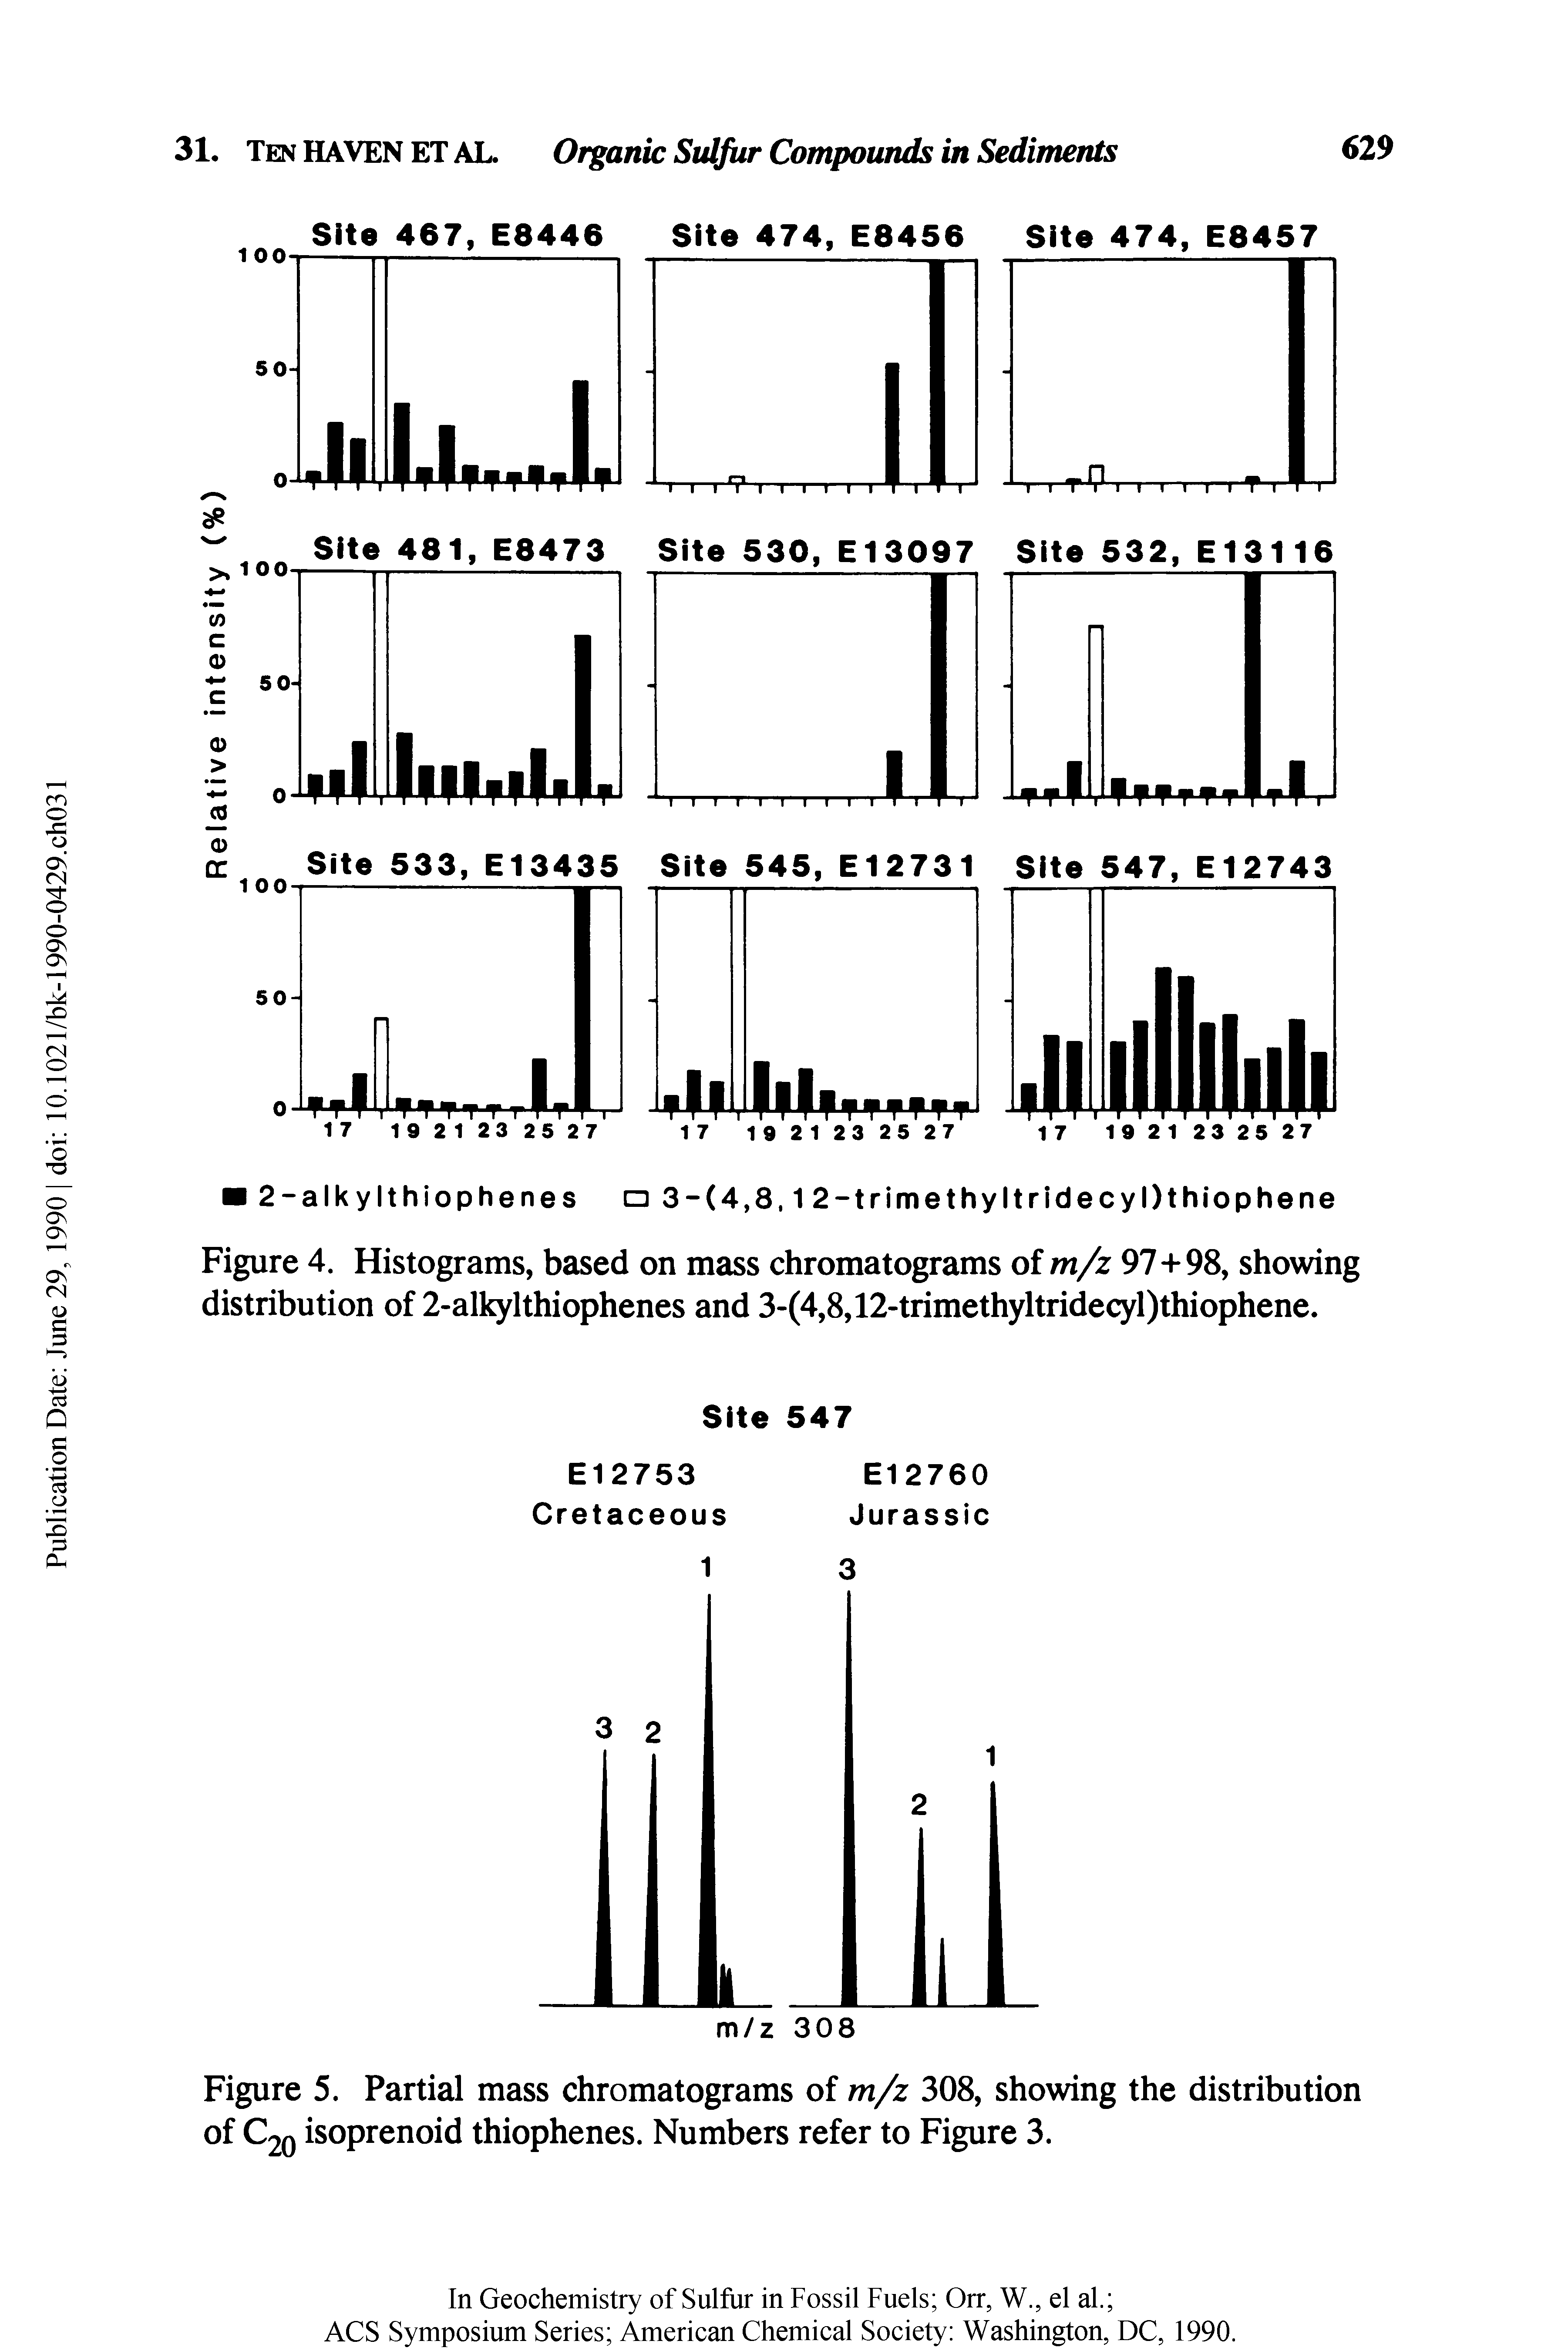 Figure 5. Partial mass chromatograms of m/z 308, showing the distribution of C20 isoprenoid thiophenes. Numbers refer to Figure 3.